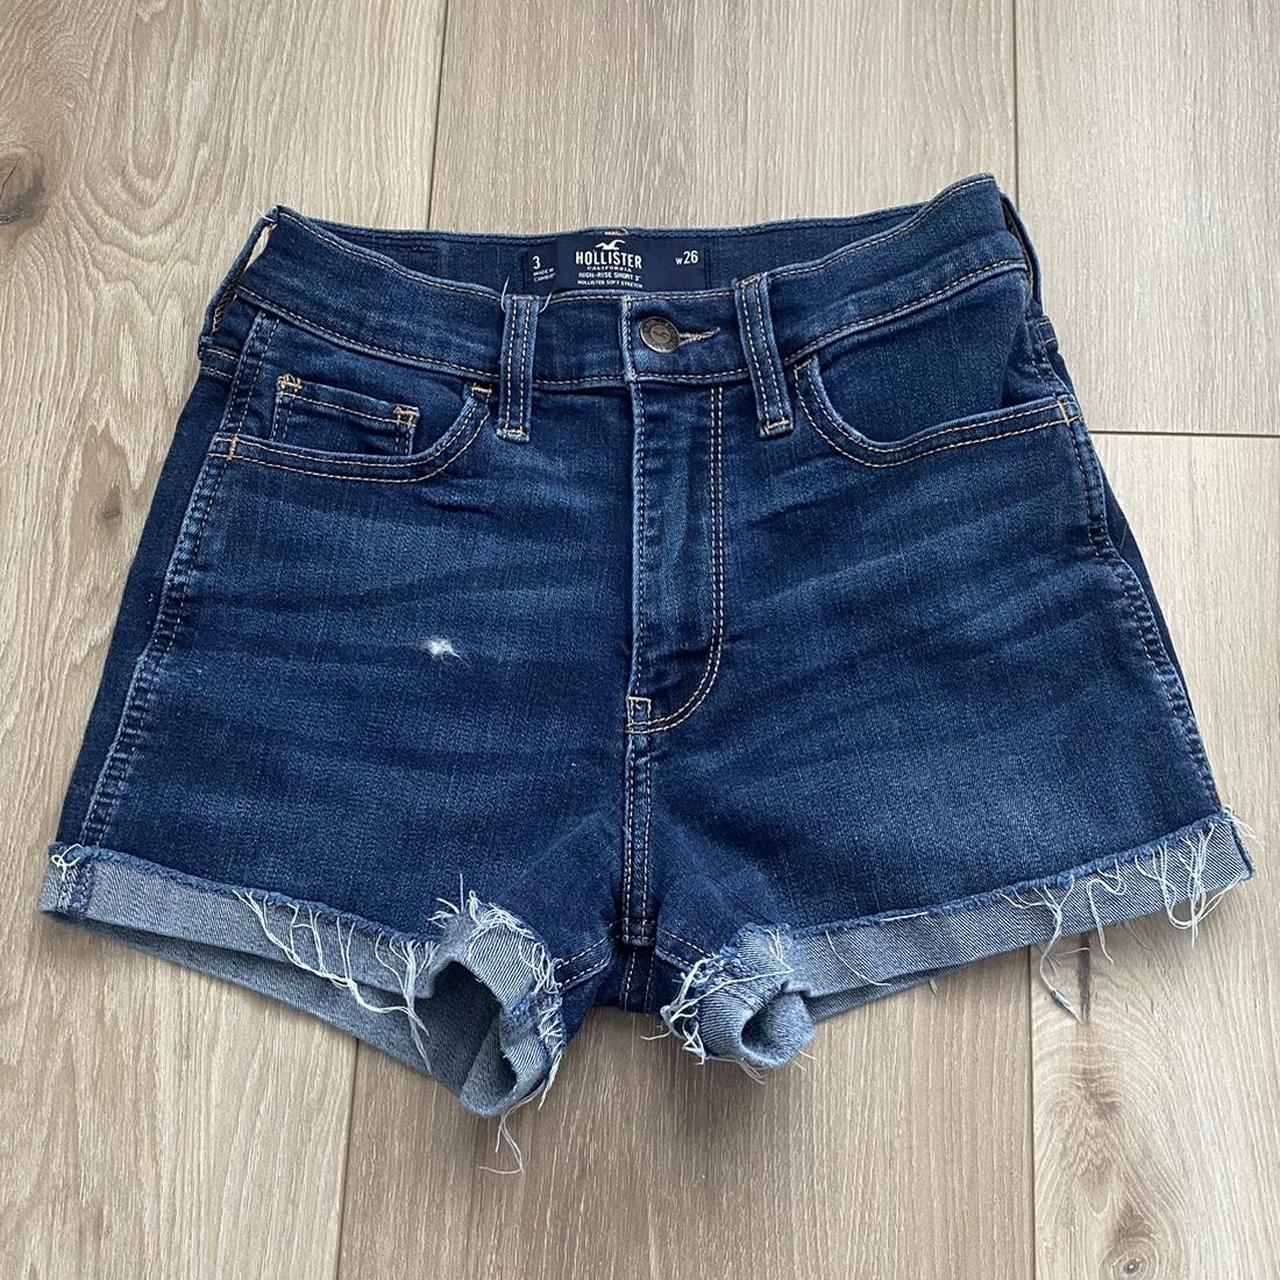 Hollister jean shorts. Size 3 w 26. Very short and - Depop